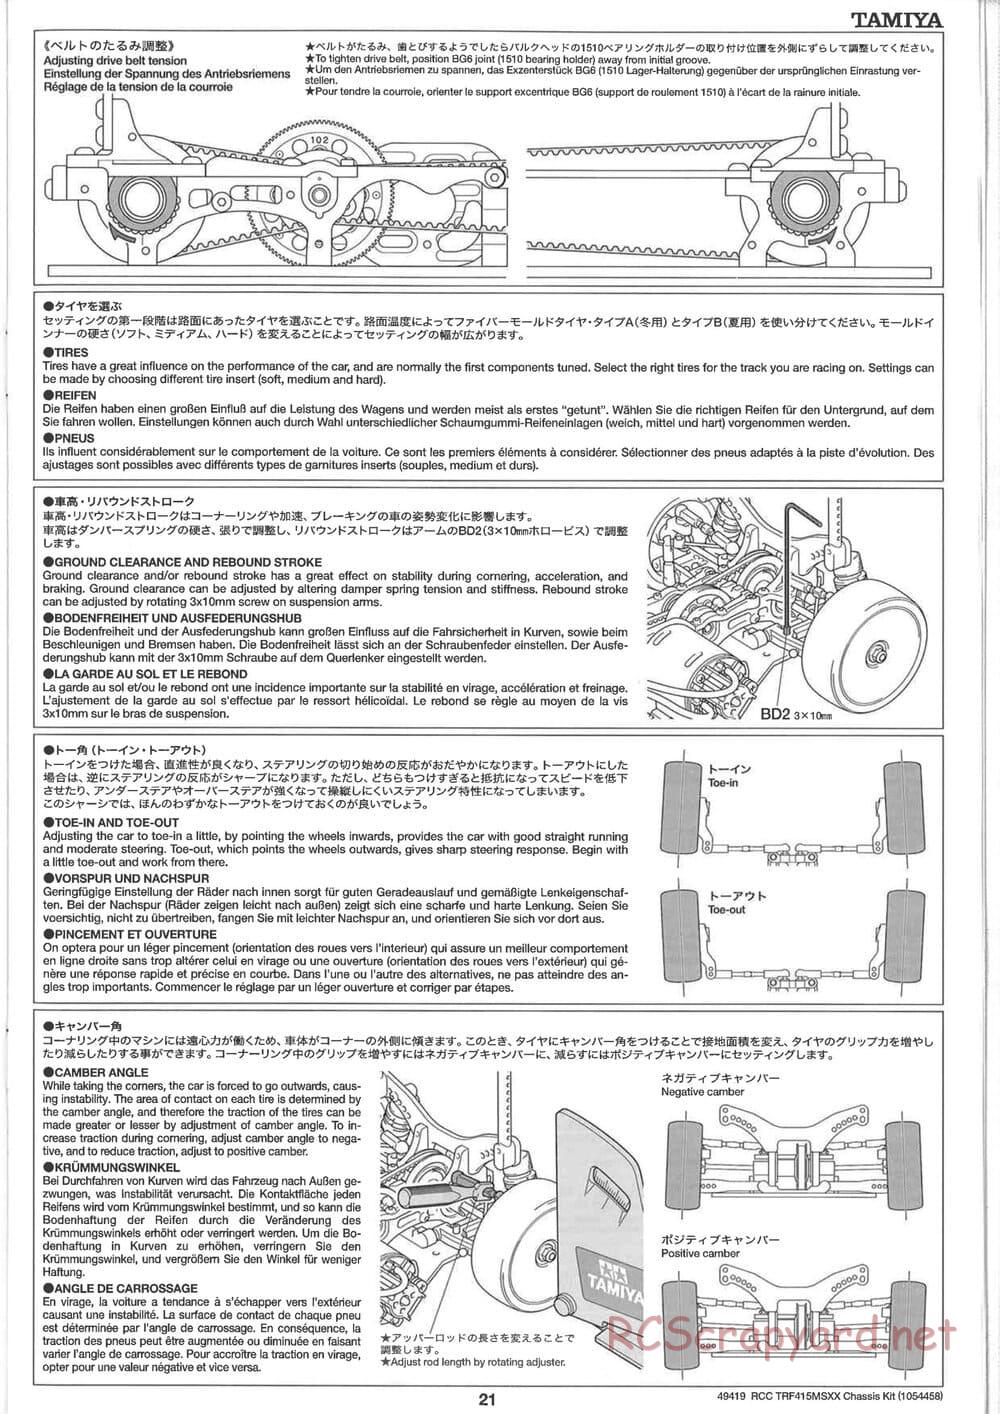 Tamiya - TRF415-MSXX Chassis - Manual - Page 21